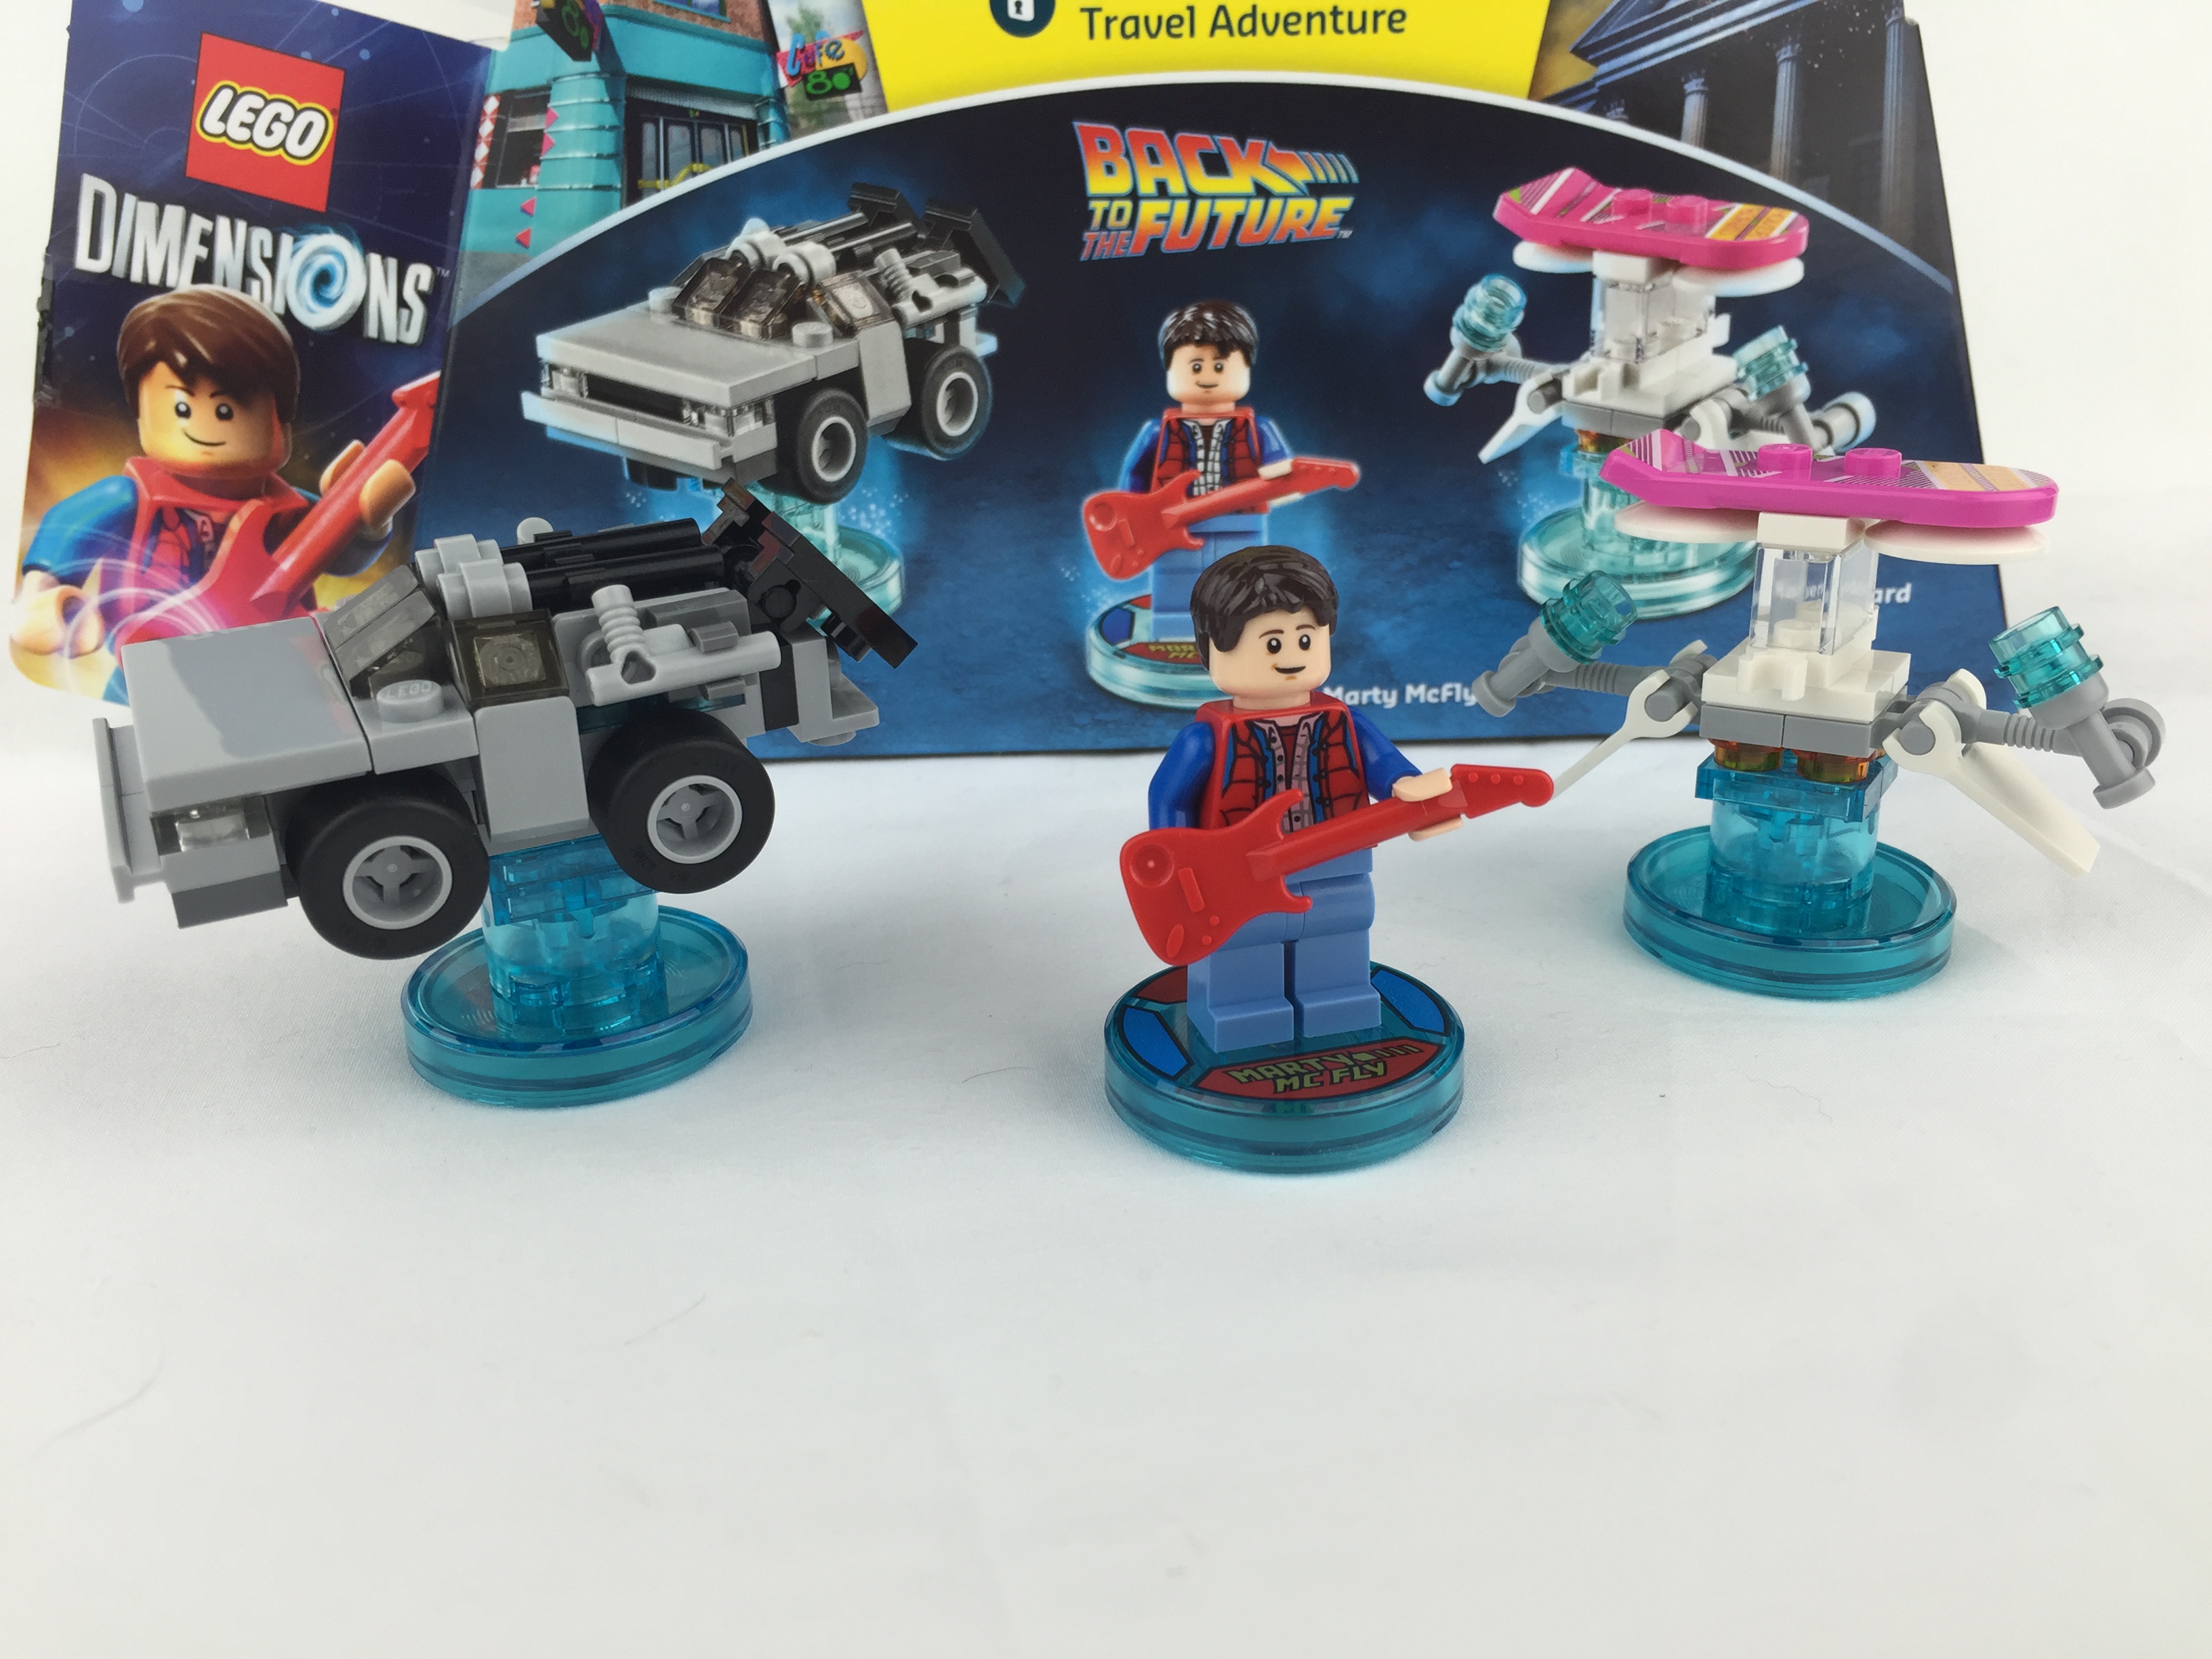 Previewing The LEGO Dimensions 71201 Back To The Future Level Pack - FBTB